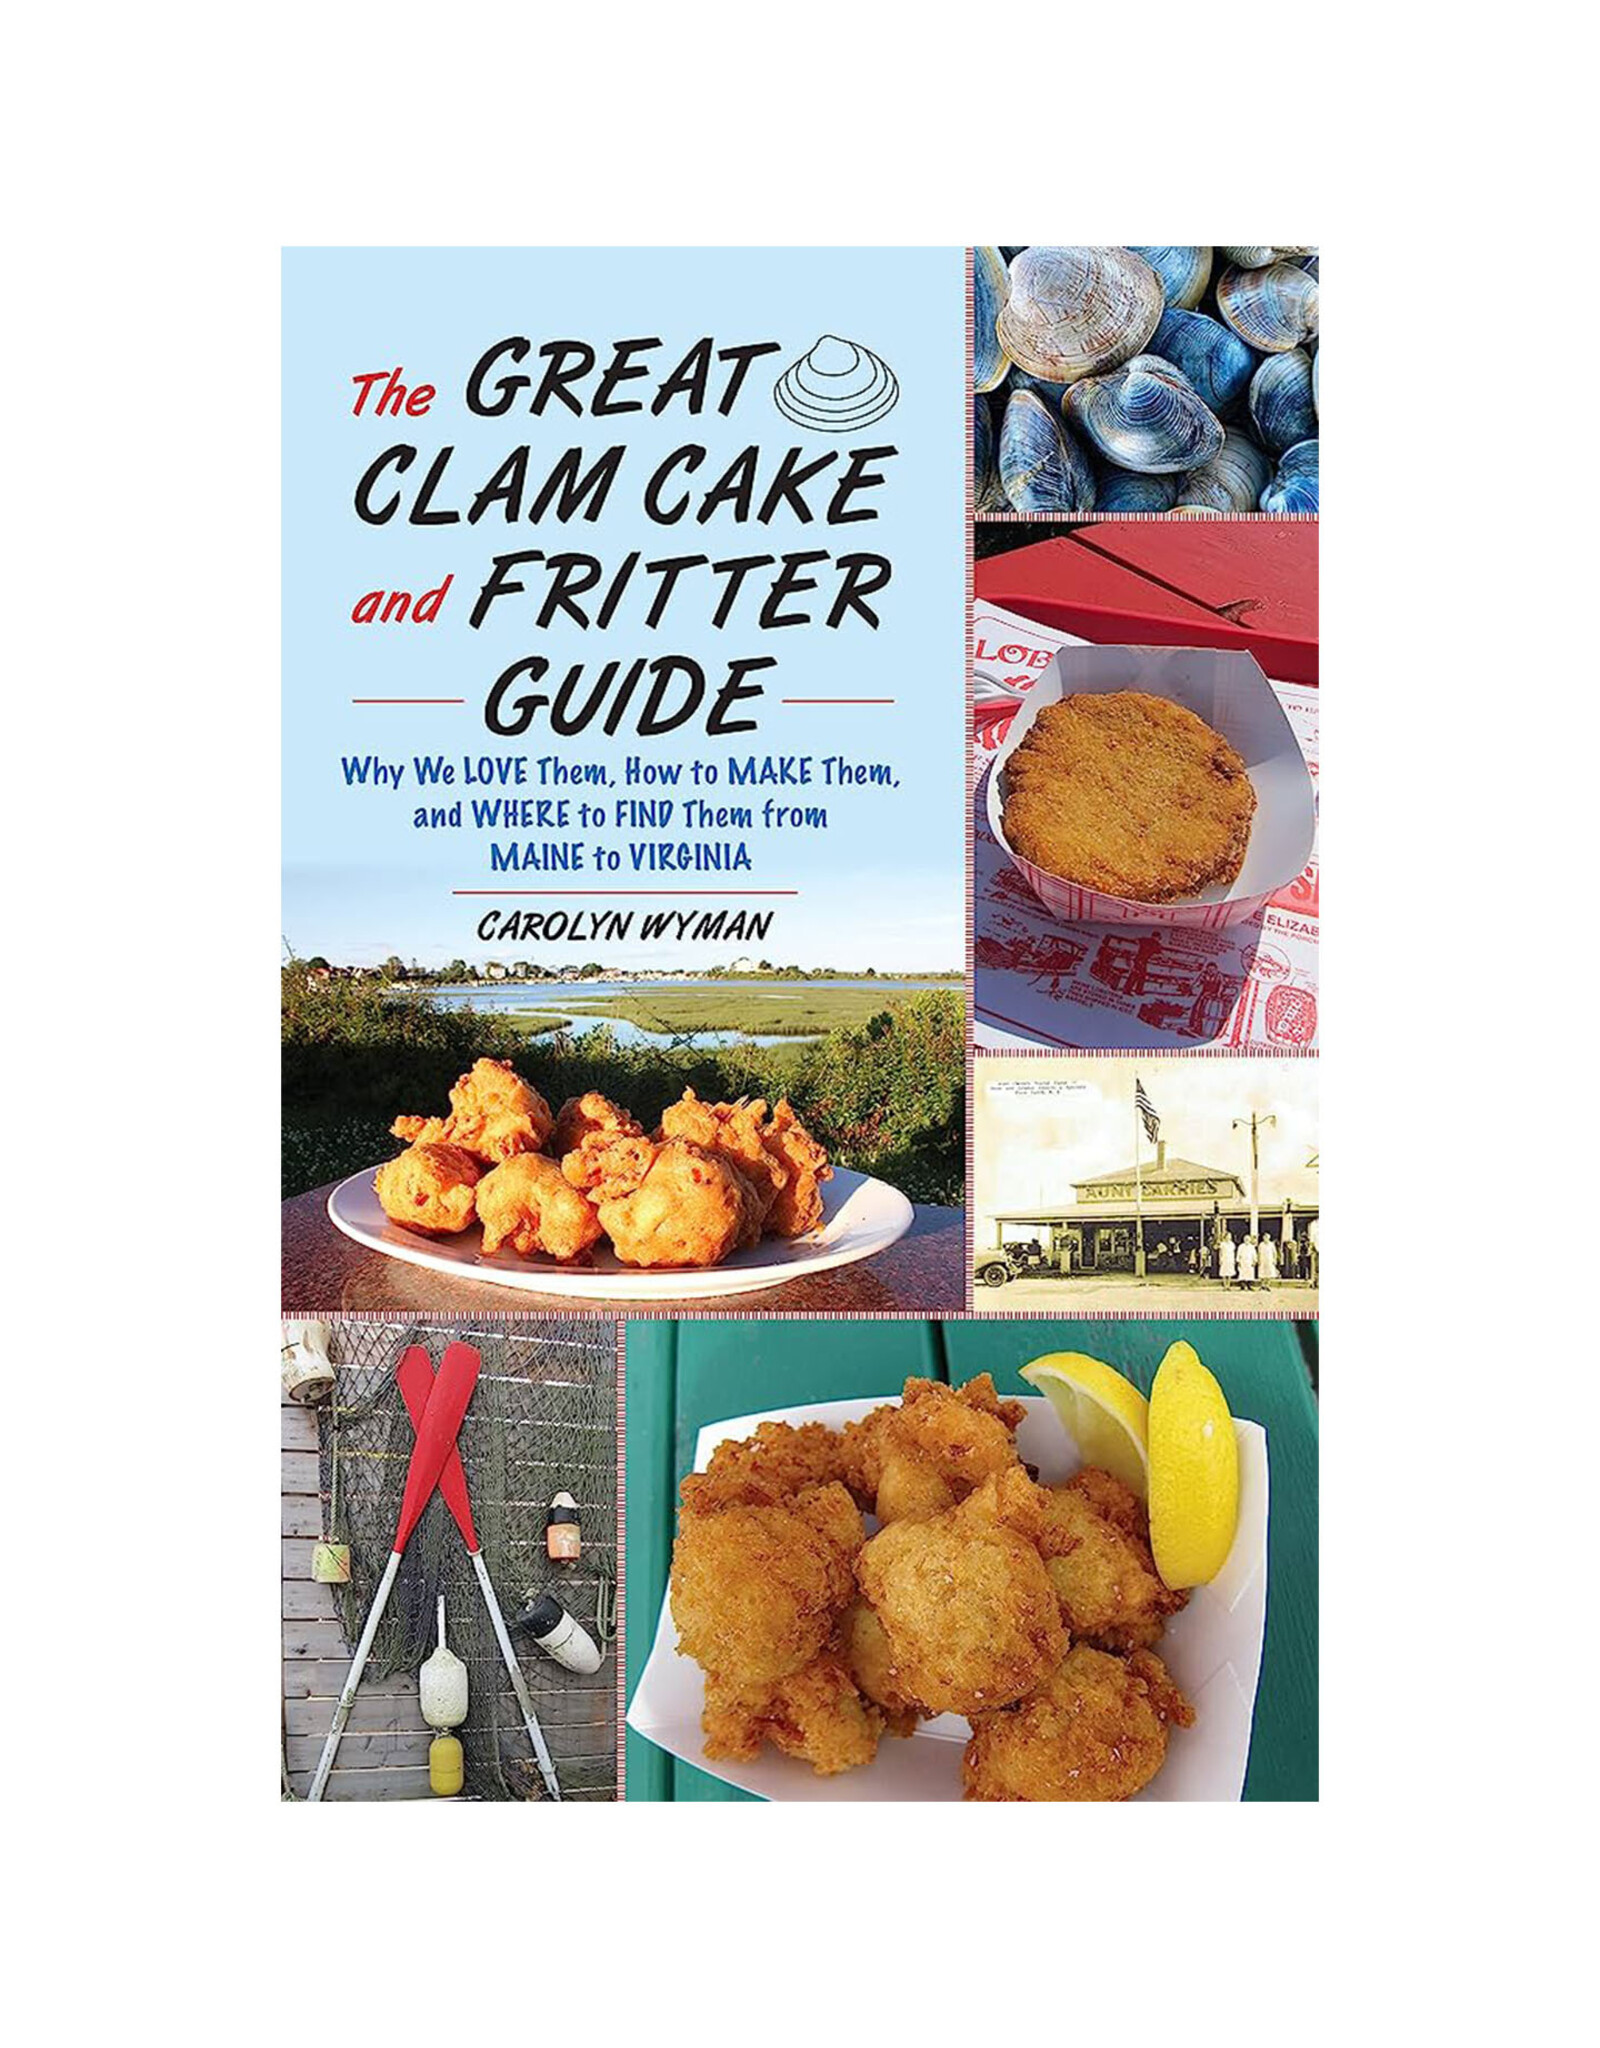 The Great Clam Cake and Fritter Guide